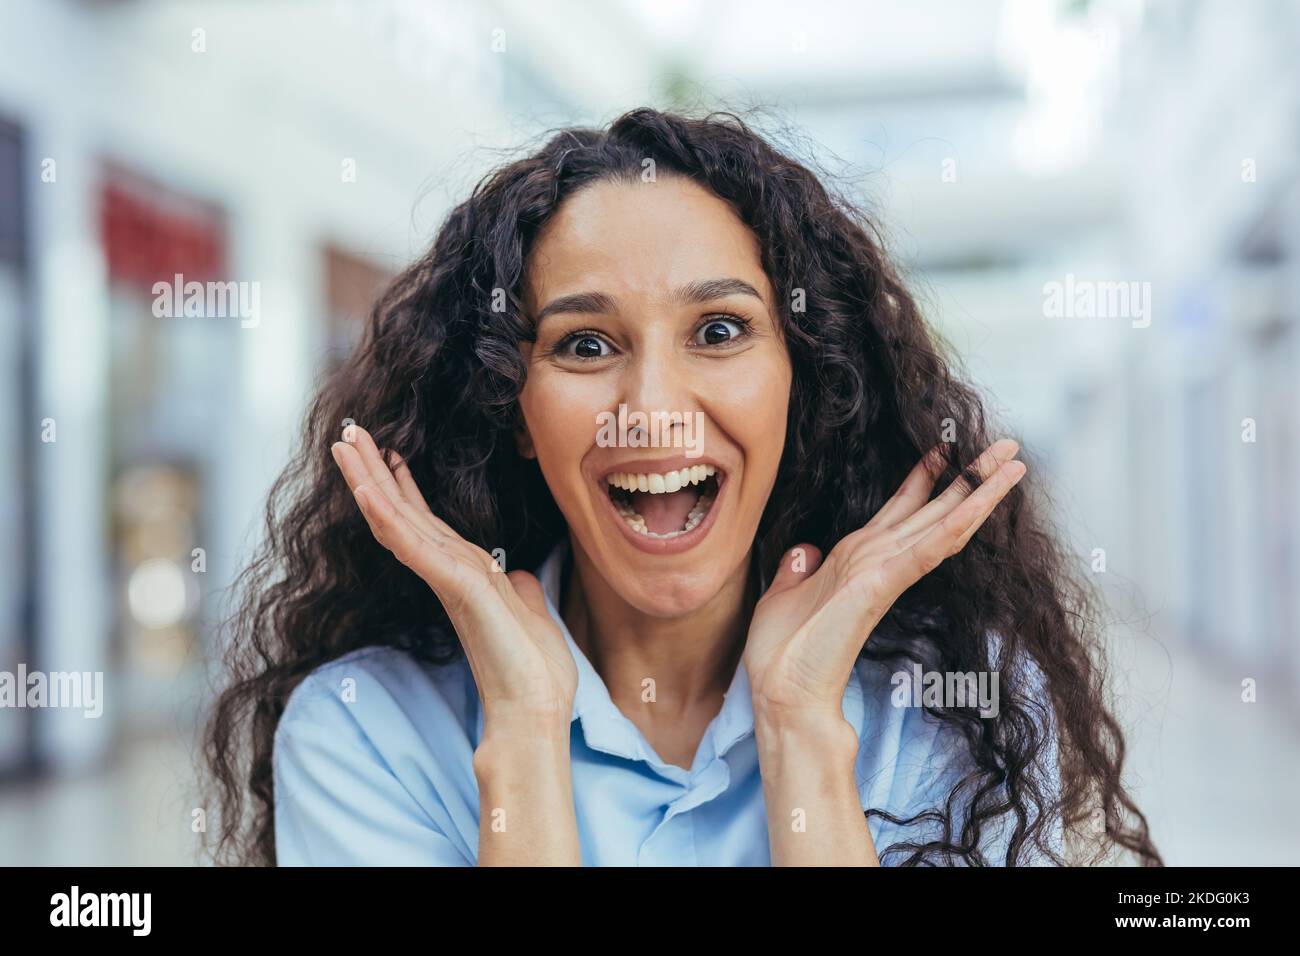 Close-up portrait of female shopper in beehive supermarket, Hispanic woman with curly hair looking at camera with smile. Stock Photo